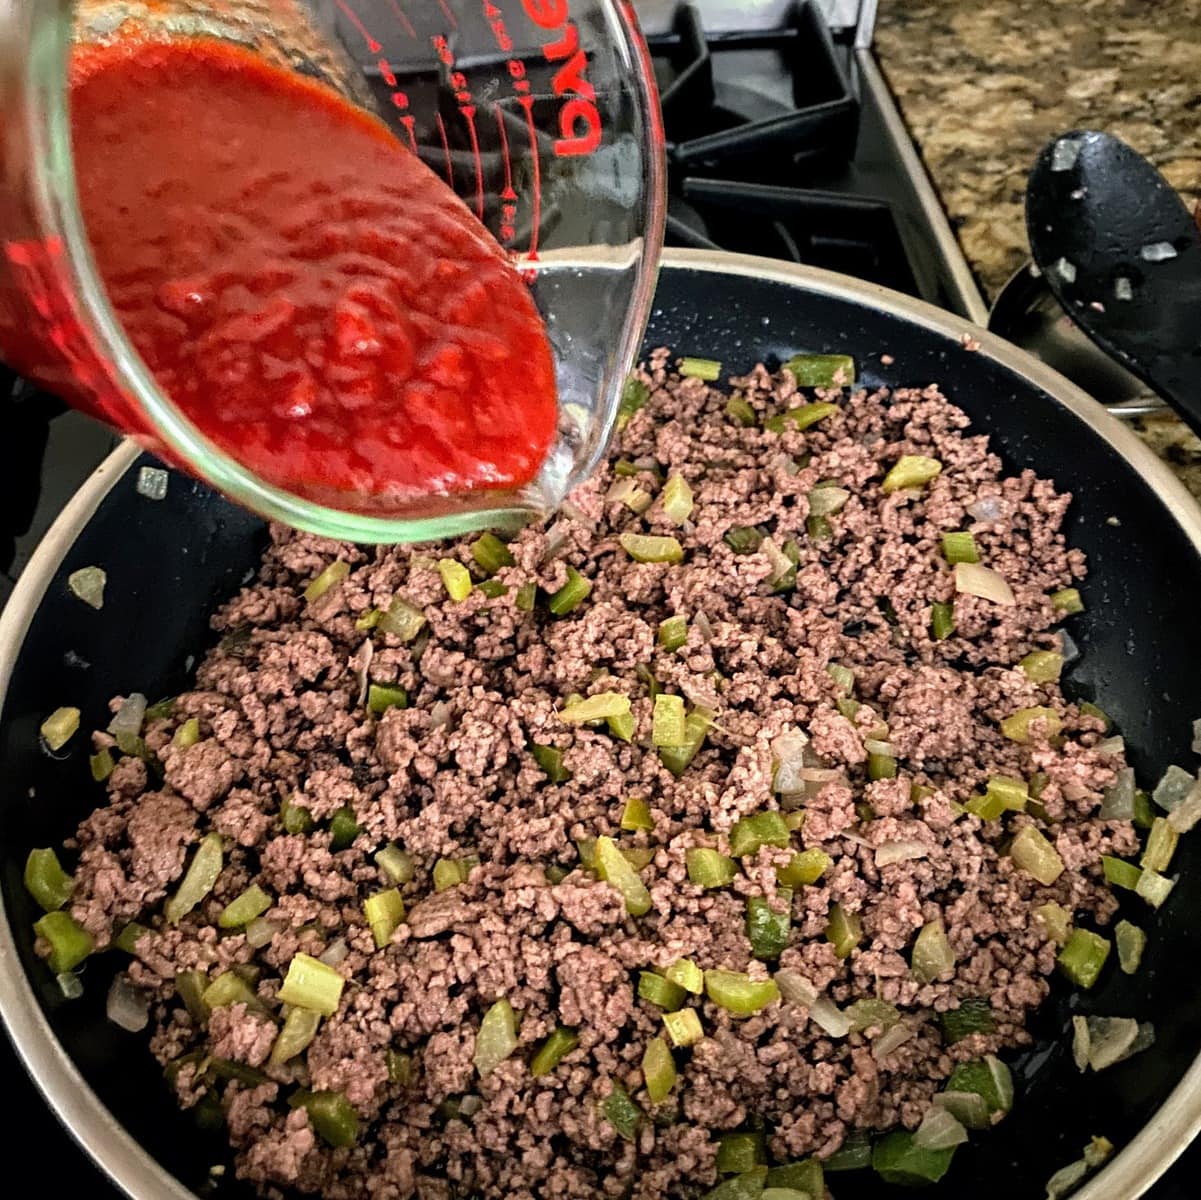 adding chili sauce to meat and veggie mixture for old fashioned sloppy joes recipe